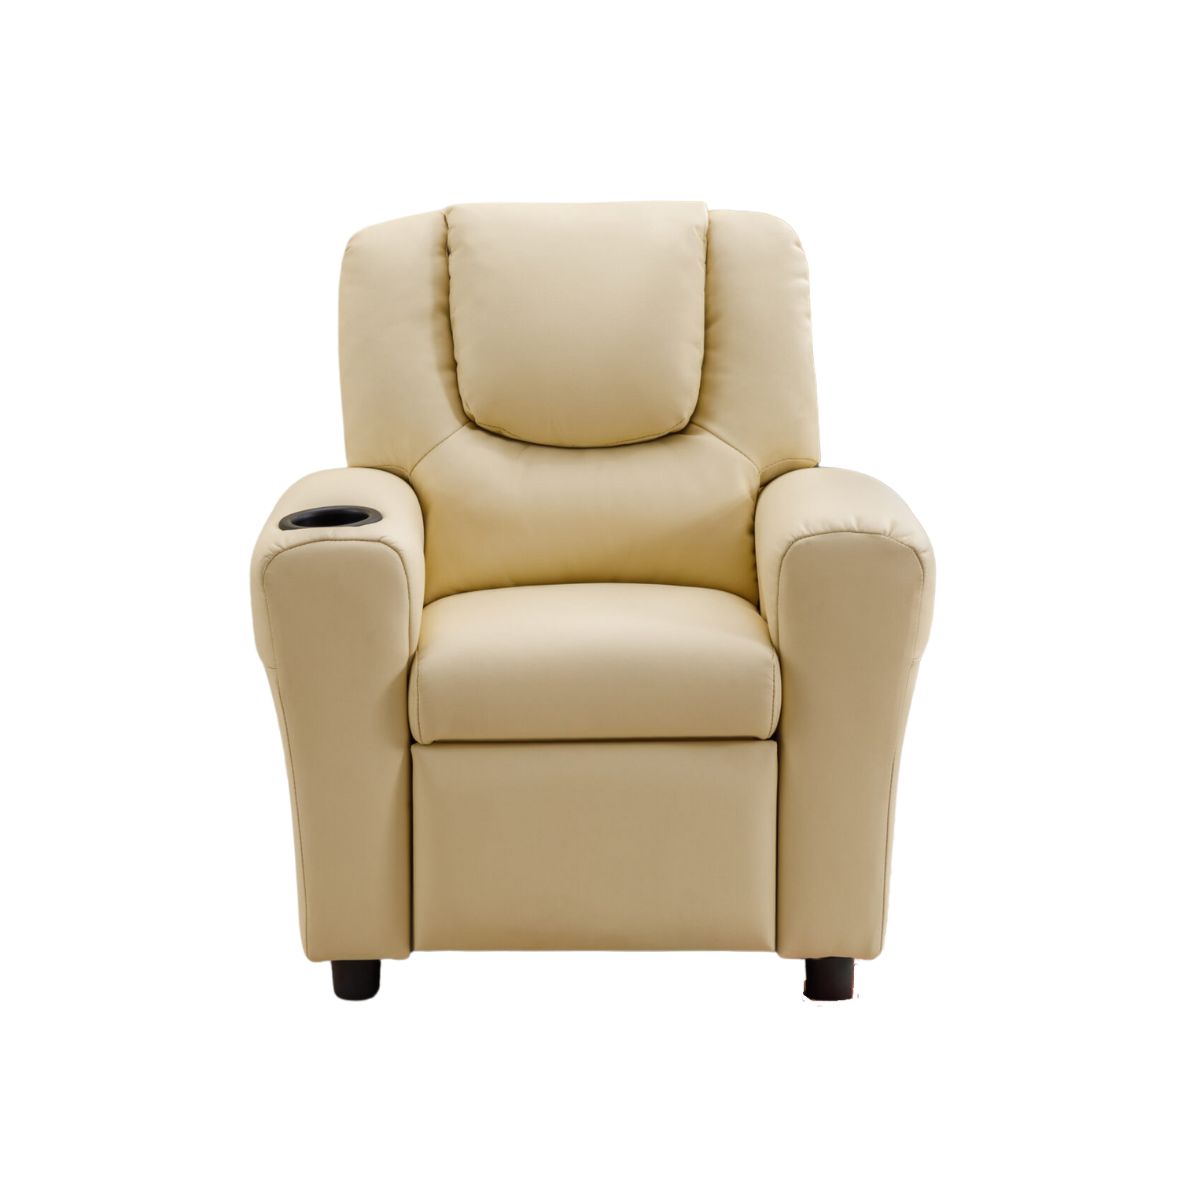 Kids Recliner Chair with Cup Holder Beige - 1